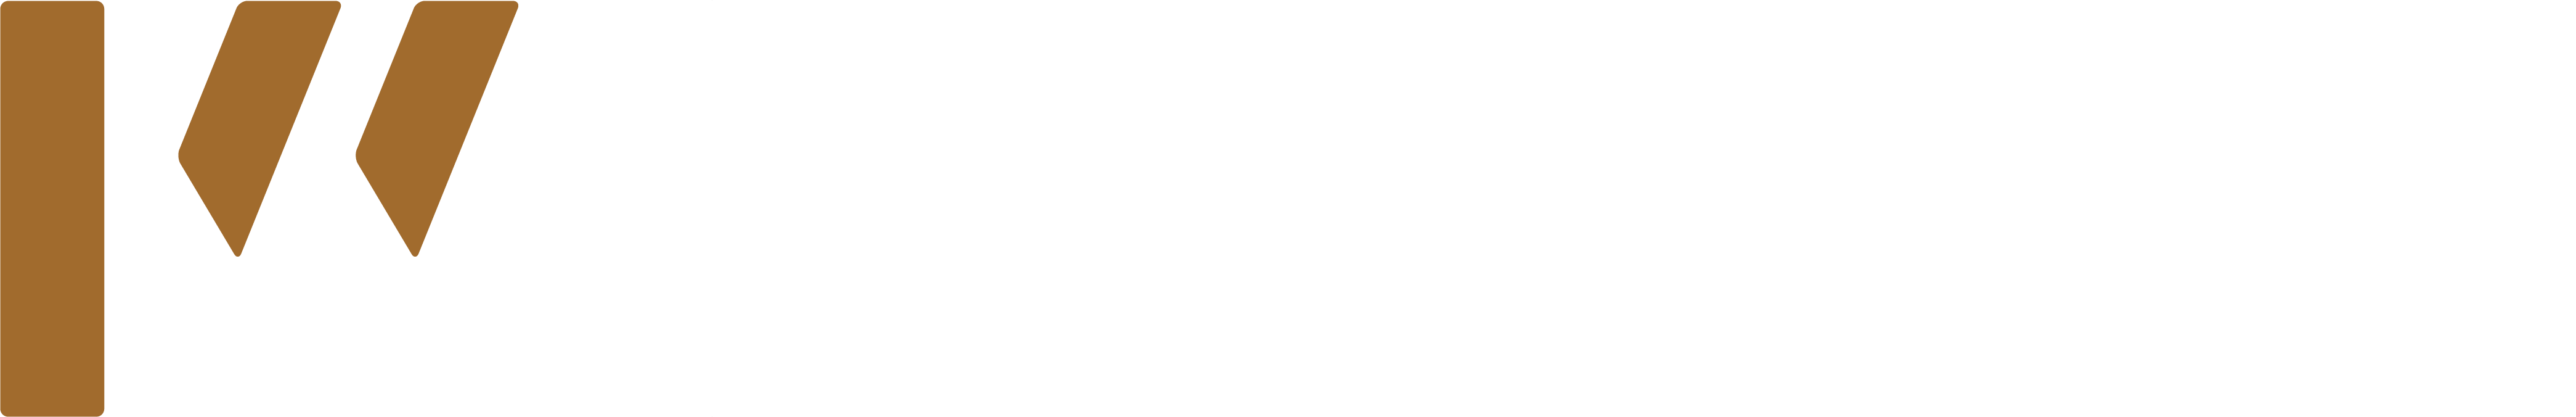 Pyxis Wealth Advisors Limited